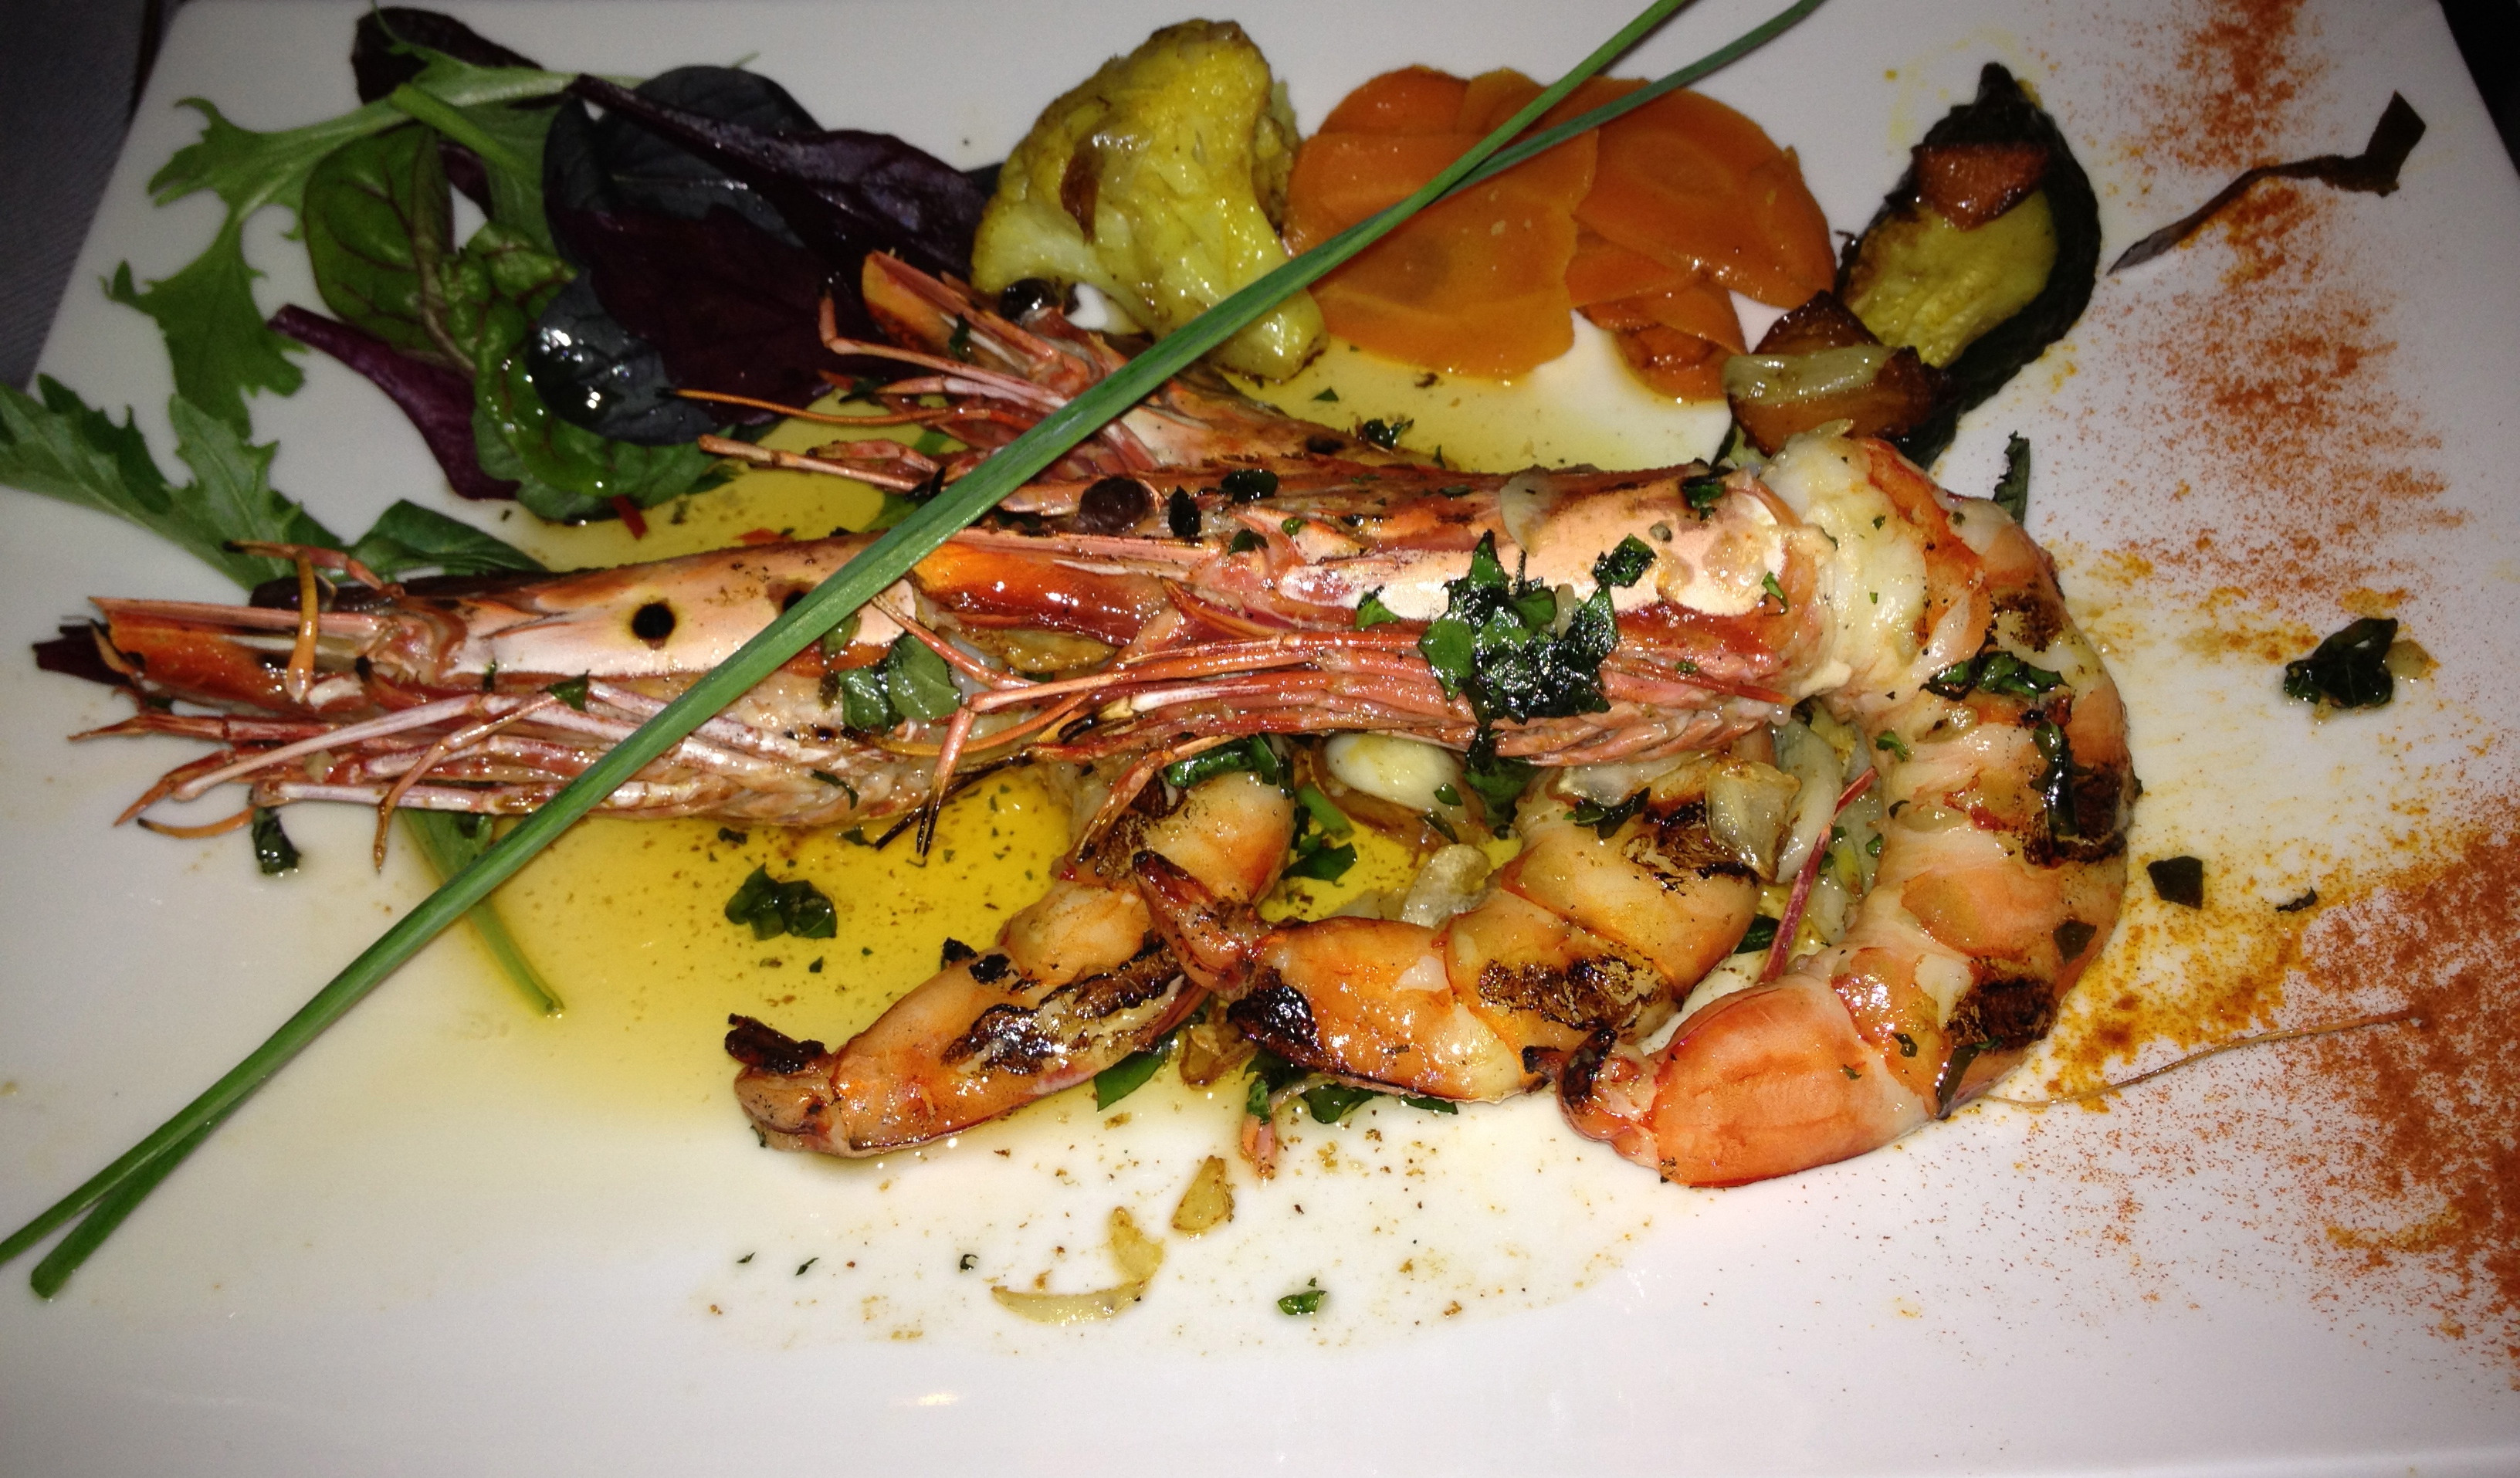 Grilled prawns - see the oil